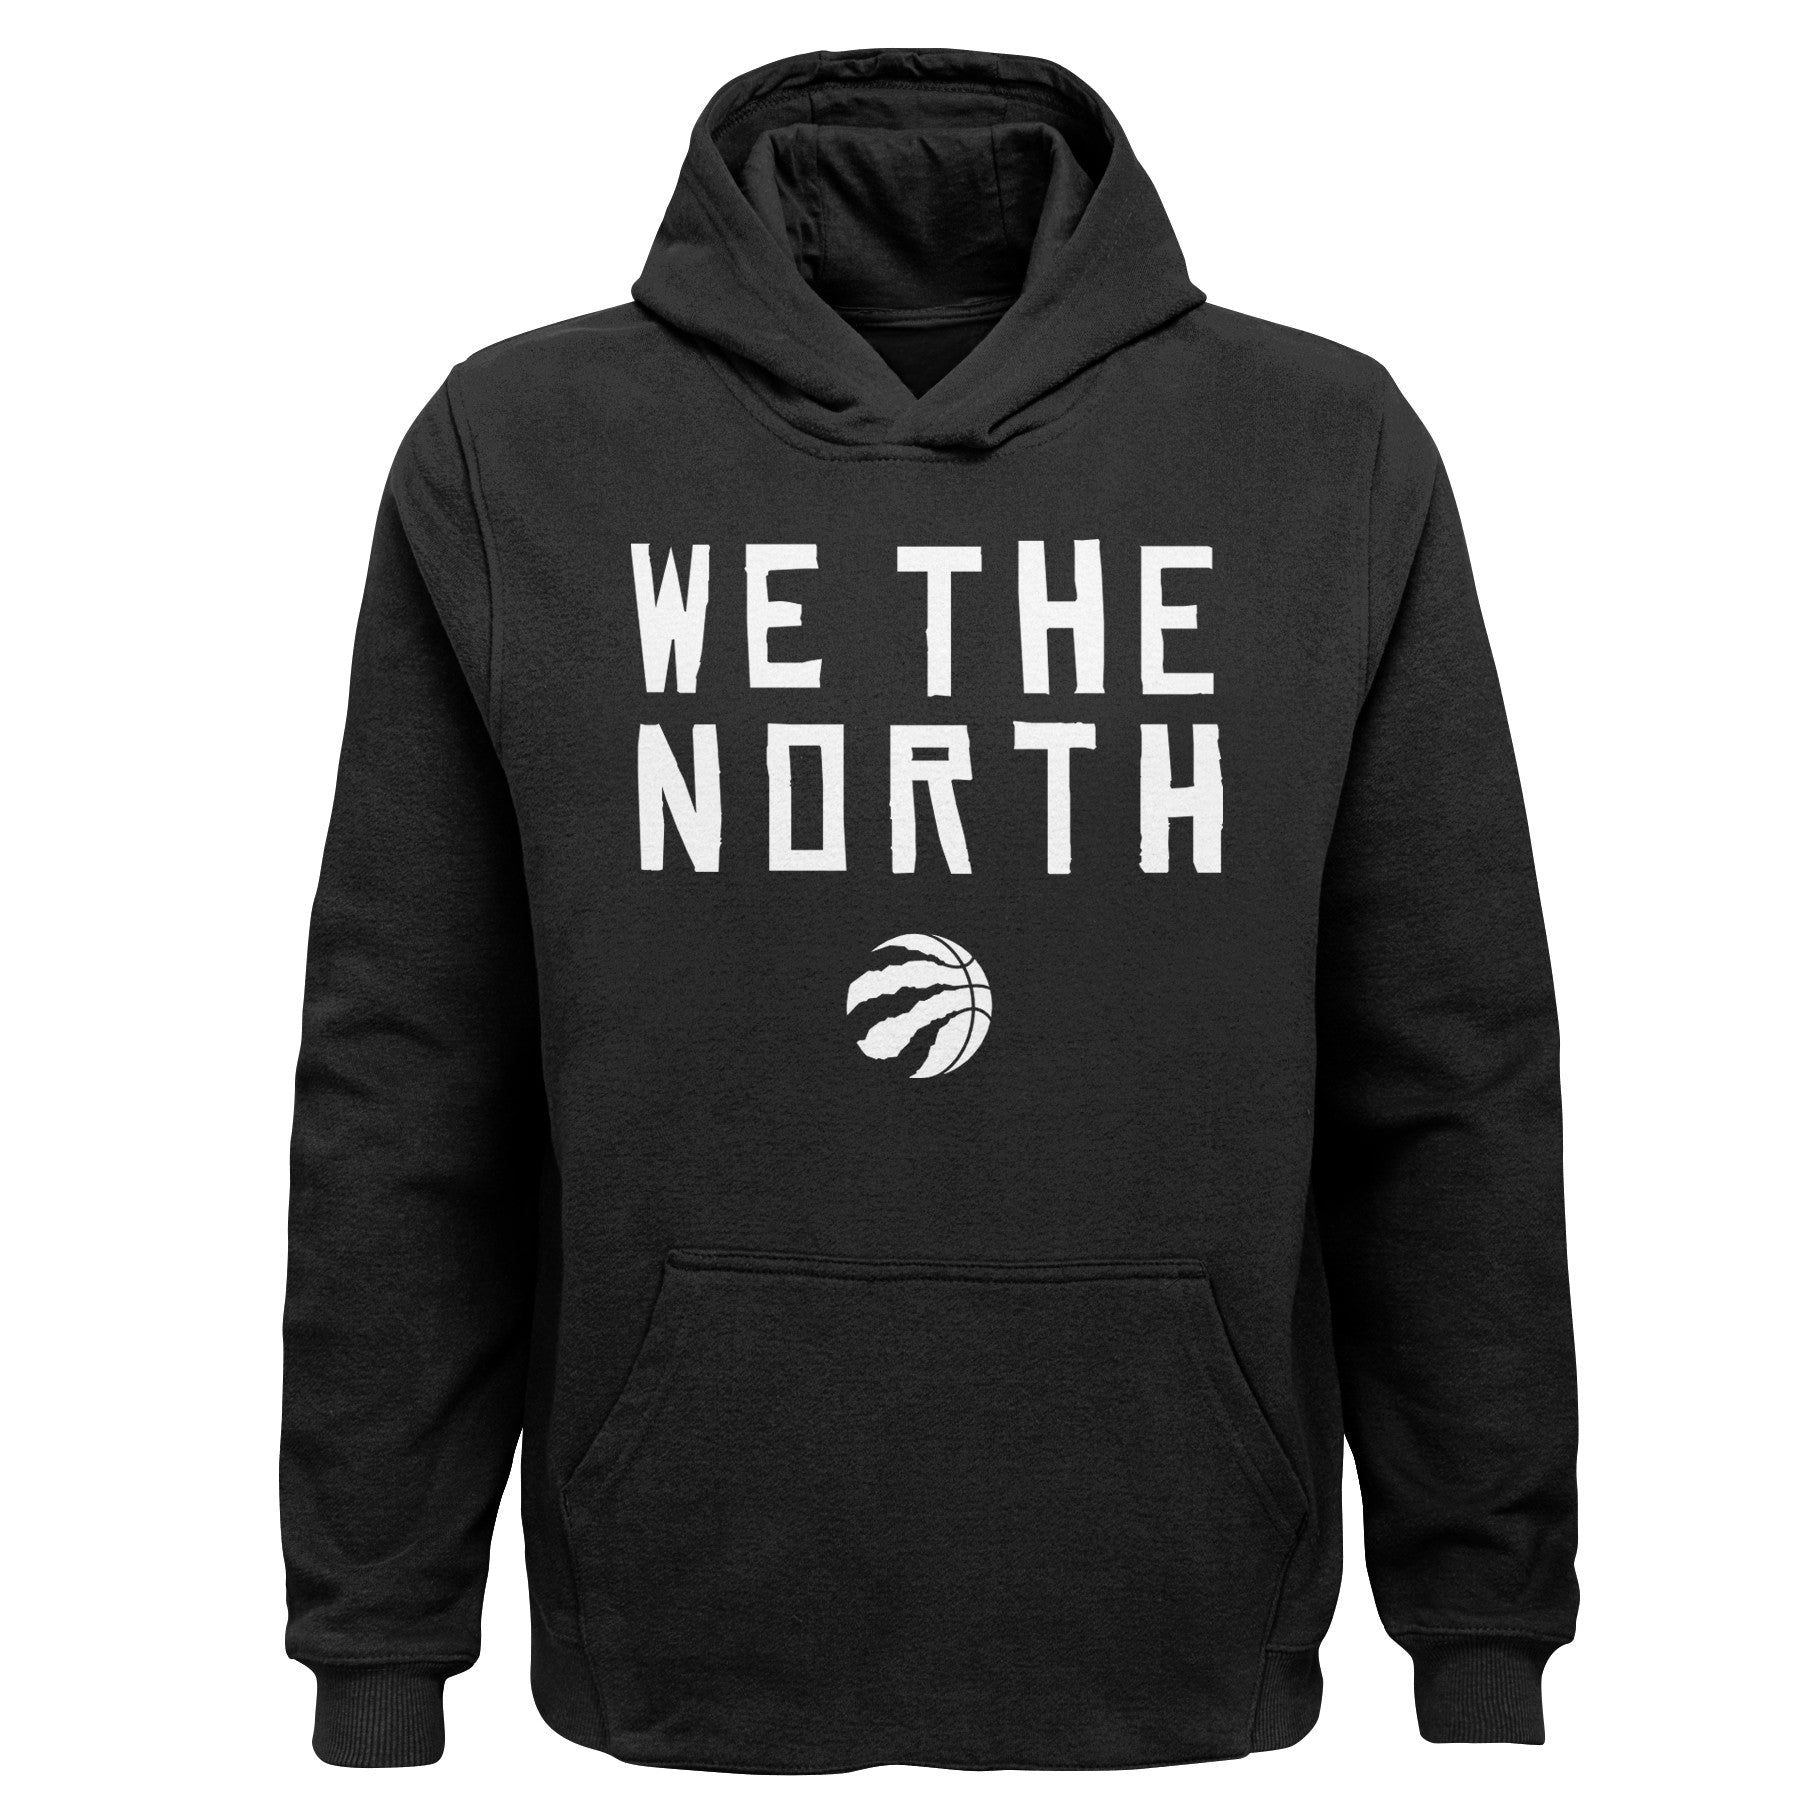 Shop 416shirtkings.com ! Get your Toronto Raptors gear ! We The North  Hoodies available now !